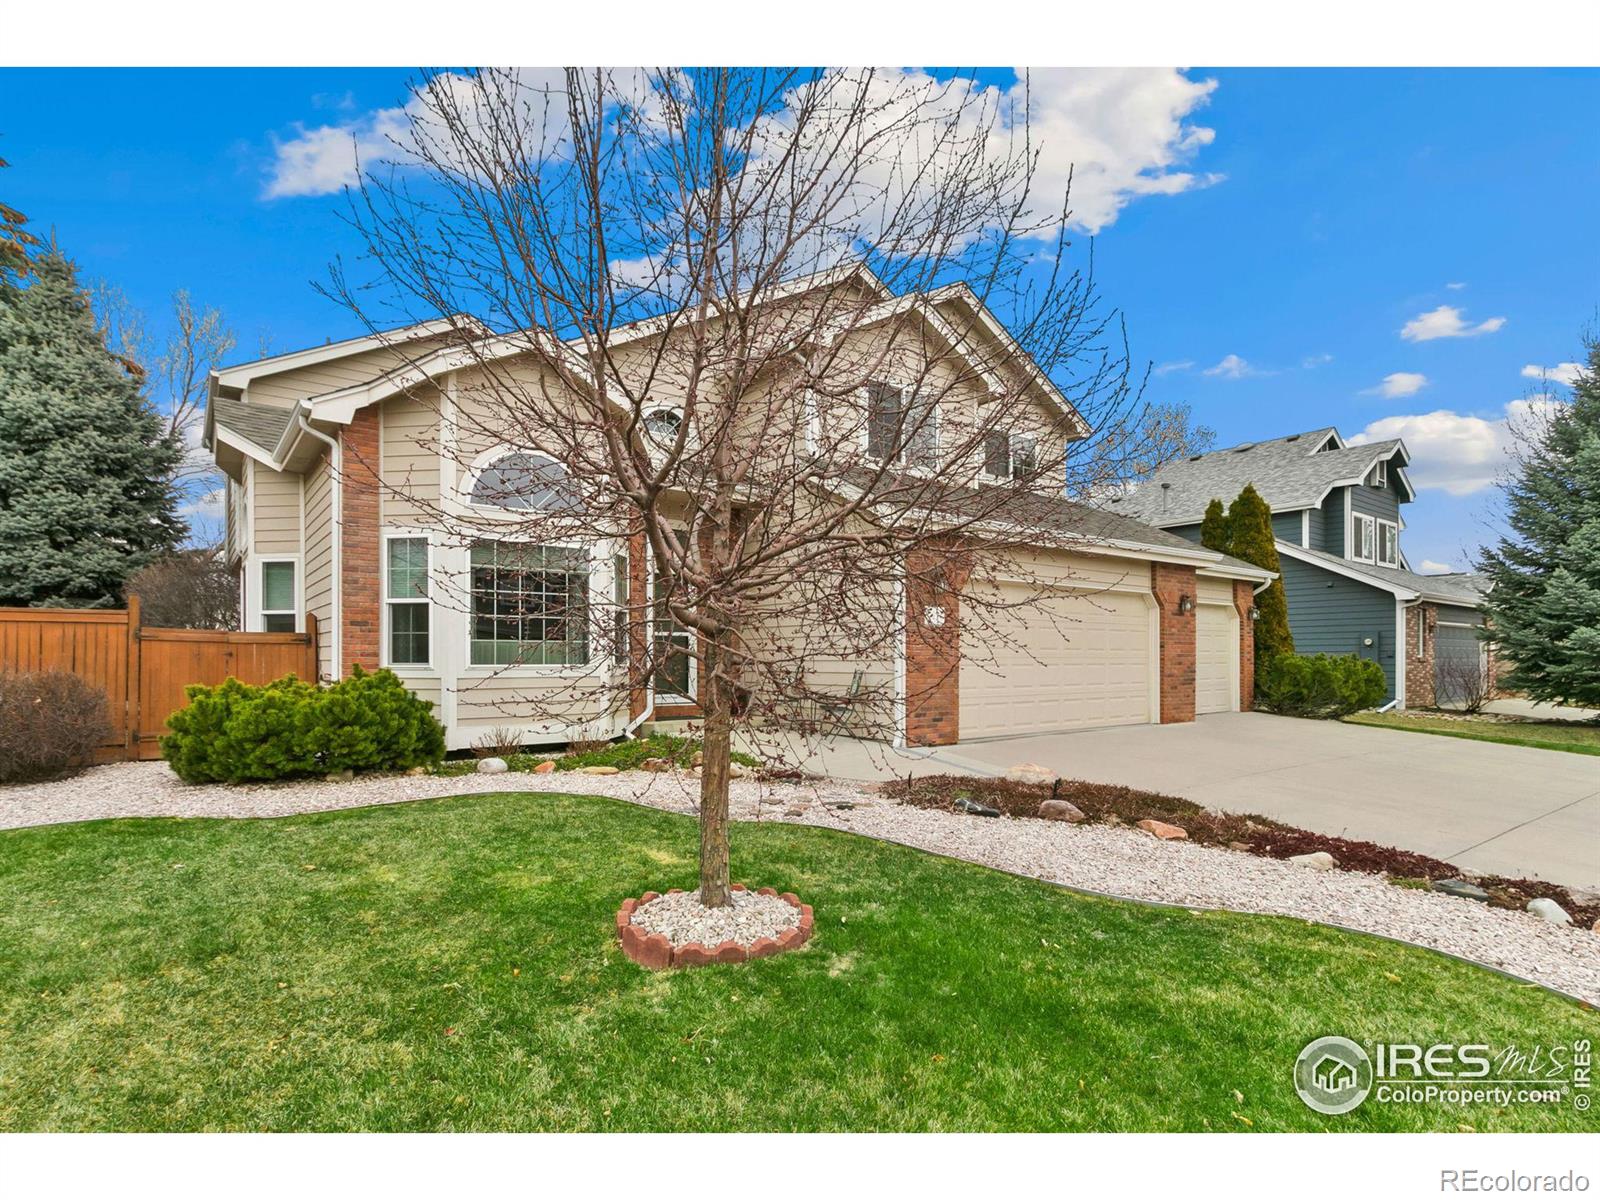 Report Image for 2214  Sweetwater Creek Drive,Fort Collins, Colorado